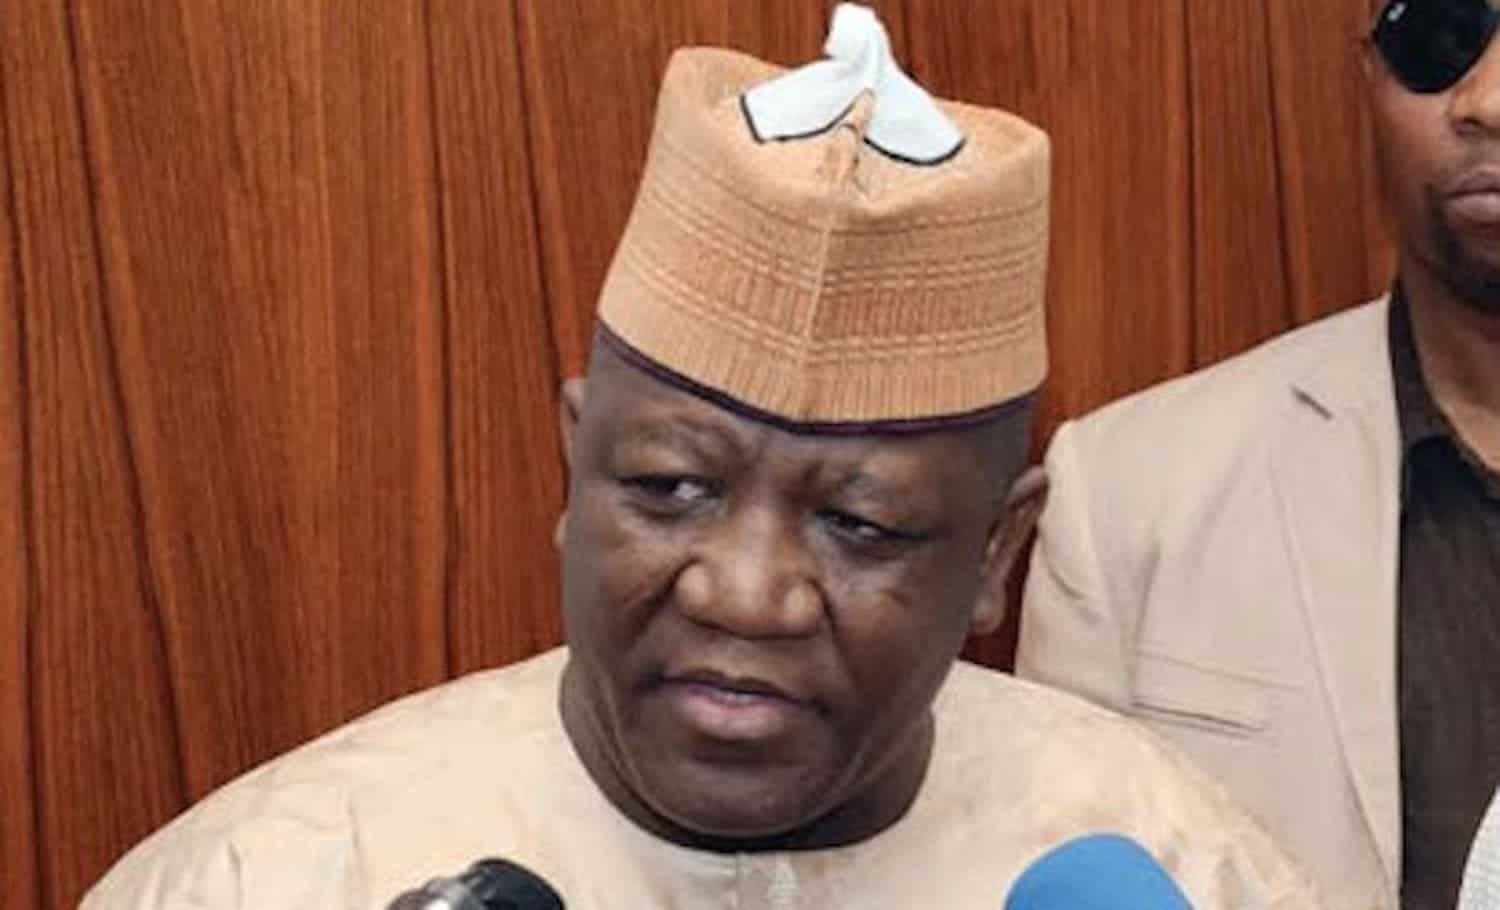 Senator Abdulaziz Yari Expresses Disappointment and Vows to Collaborate with Senate President Following Leadership Election Result